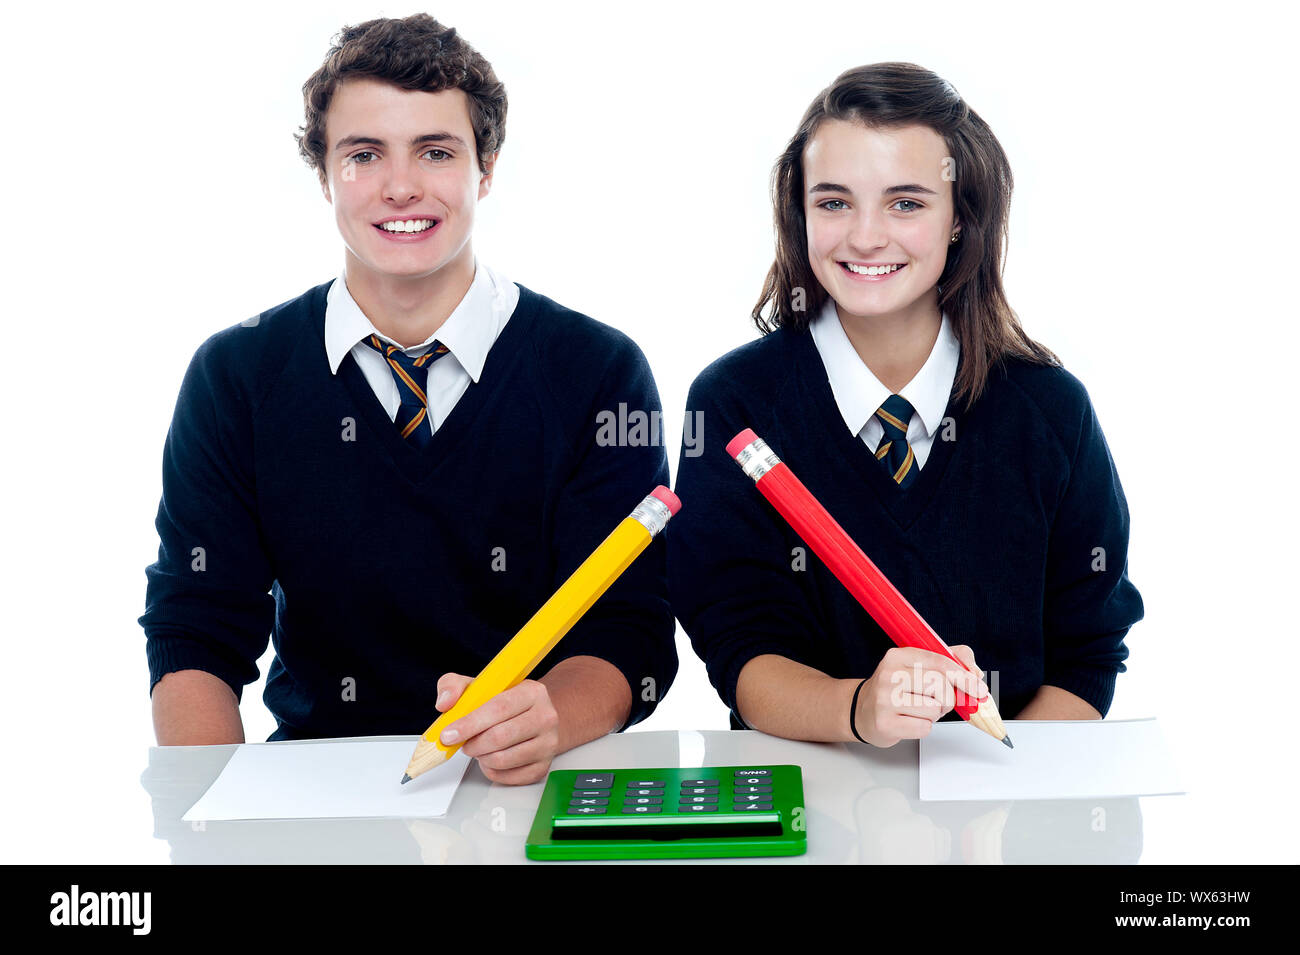 Studious students ready to take down the notes. Holding big pencil with calculator lying on desk Stock Photo